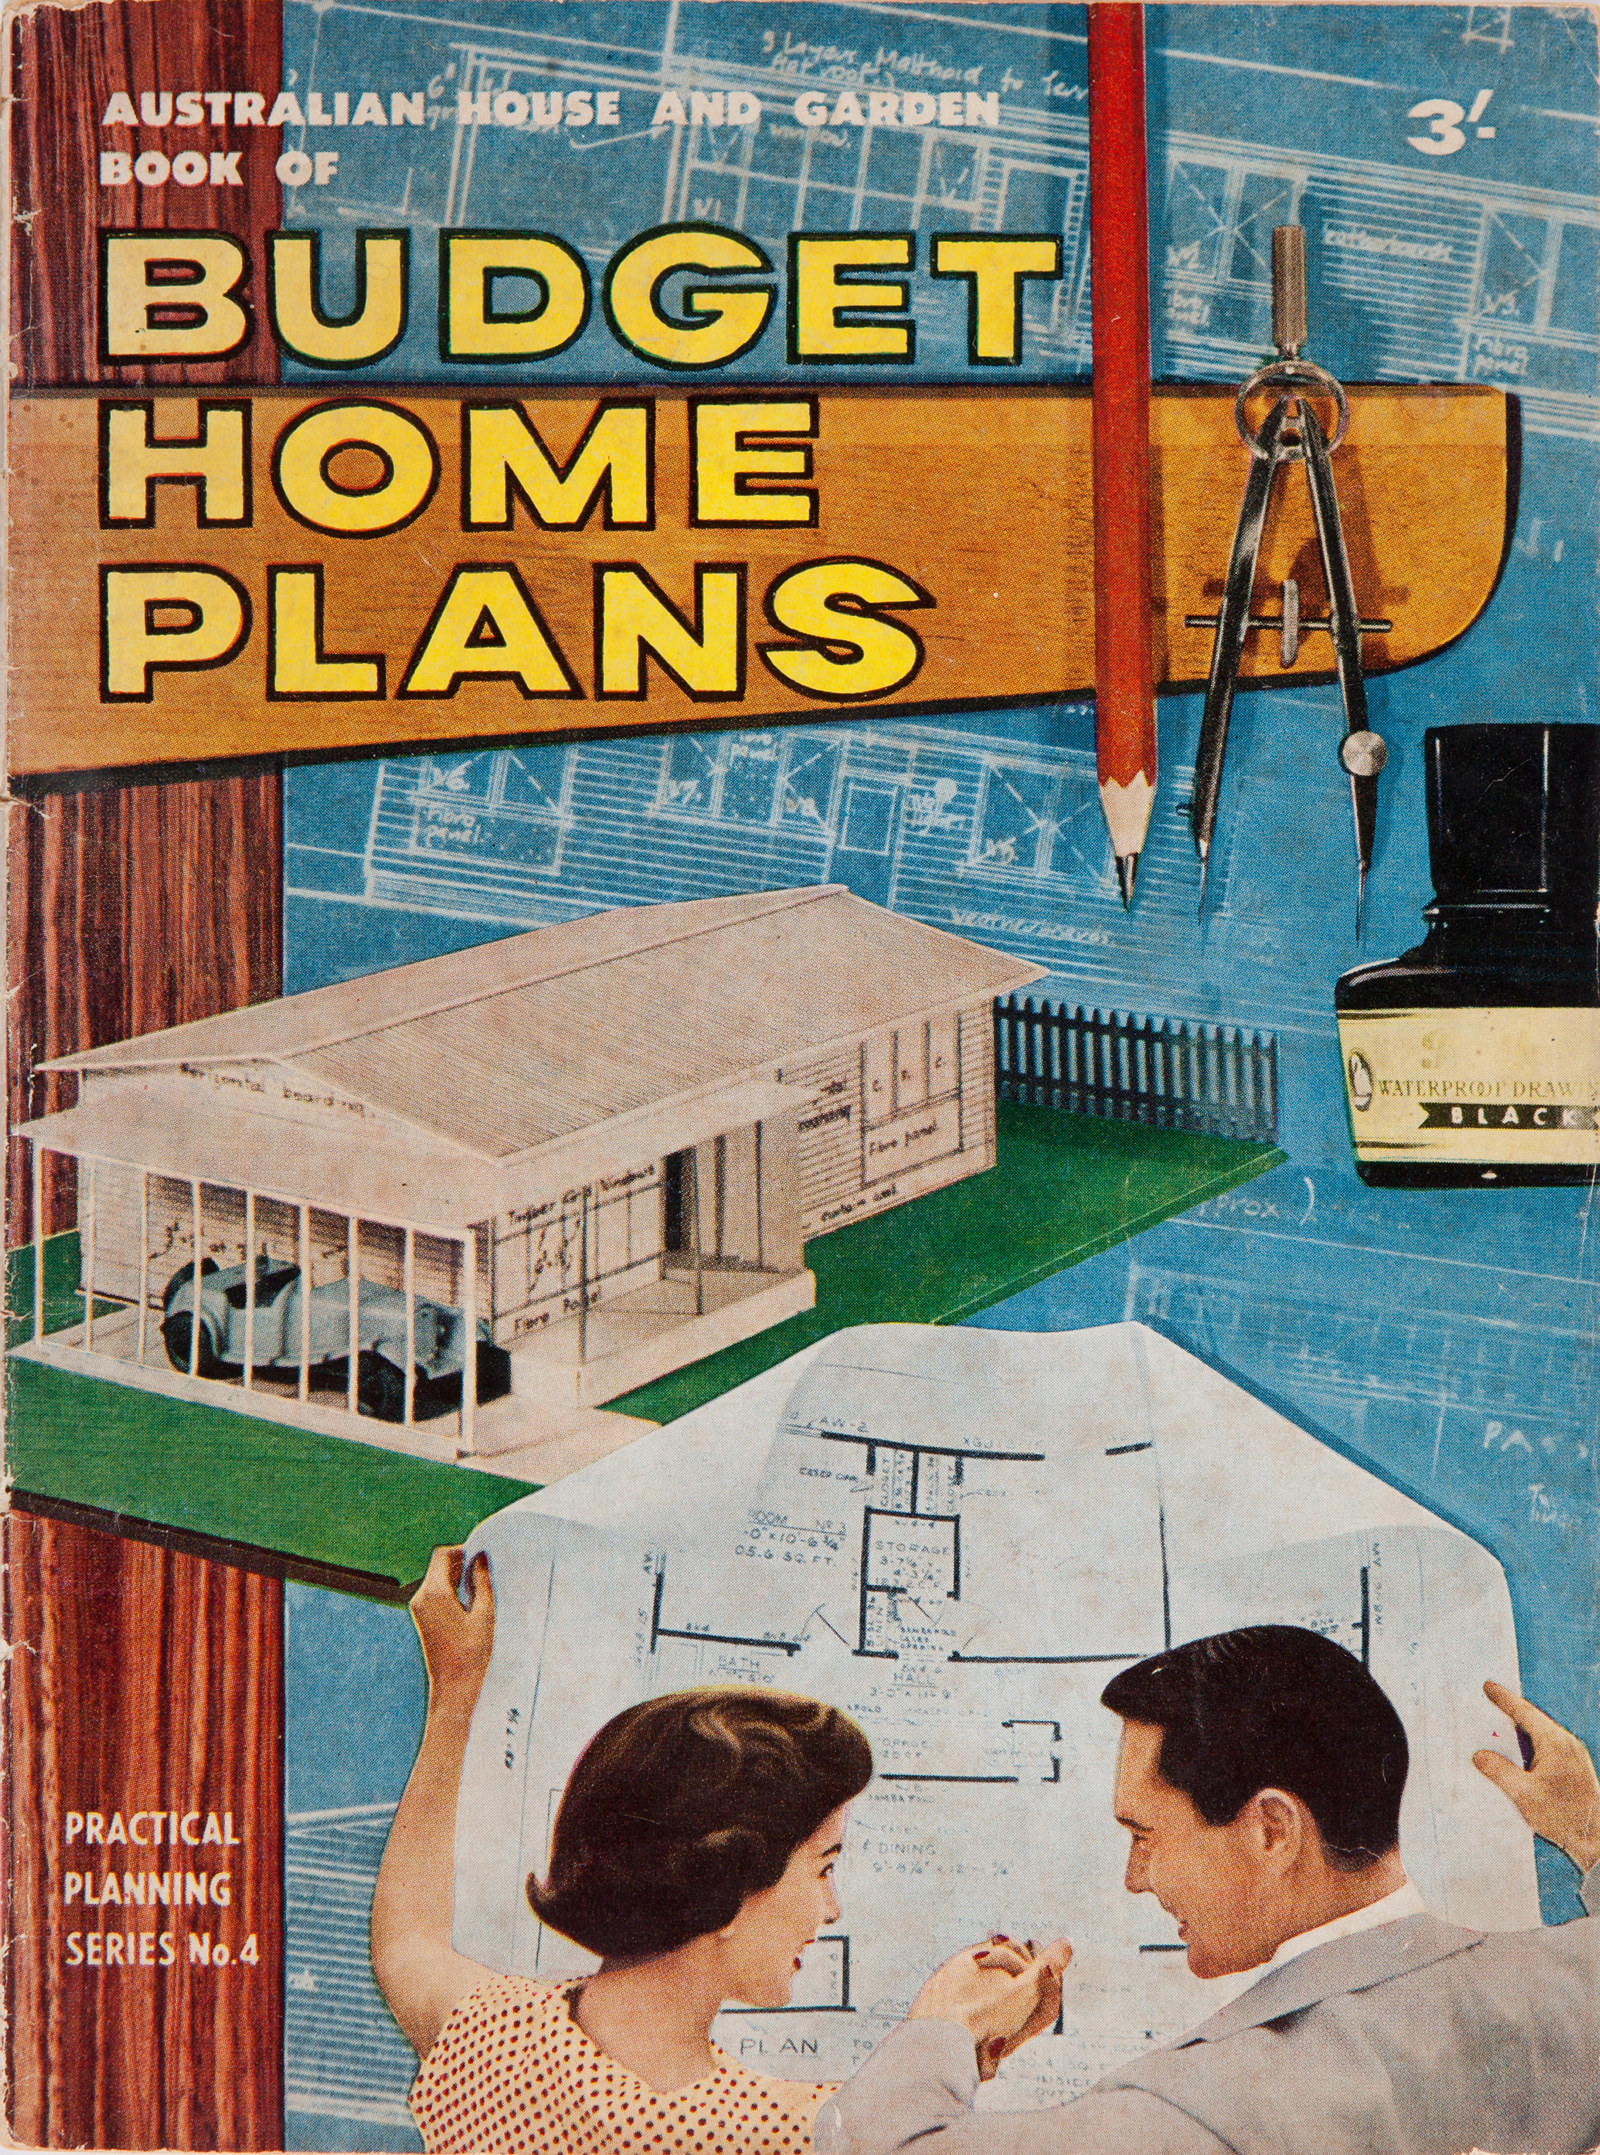 Cover of book, with colour illustration of house and two people looking at a home plan.